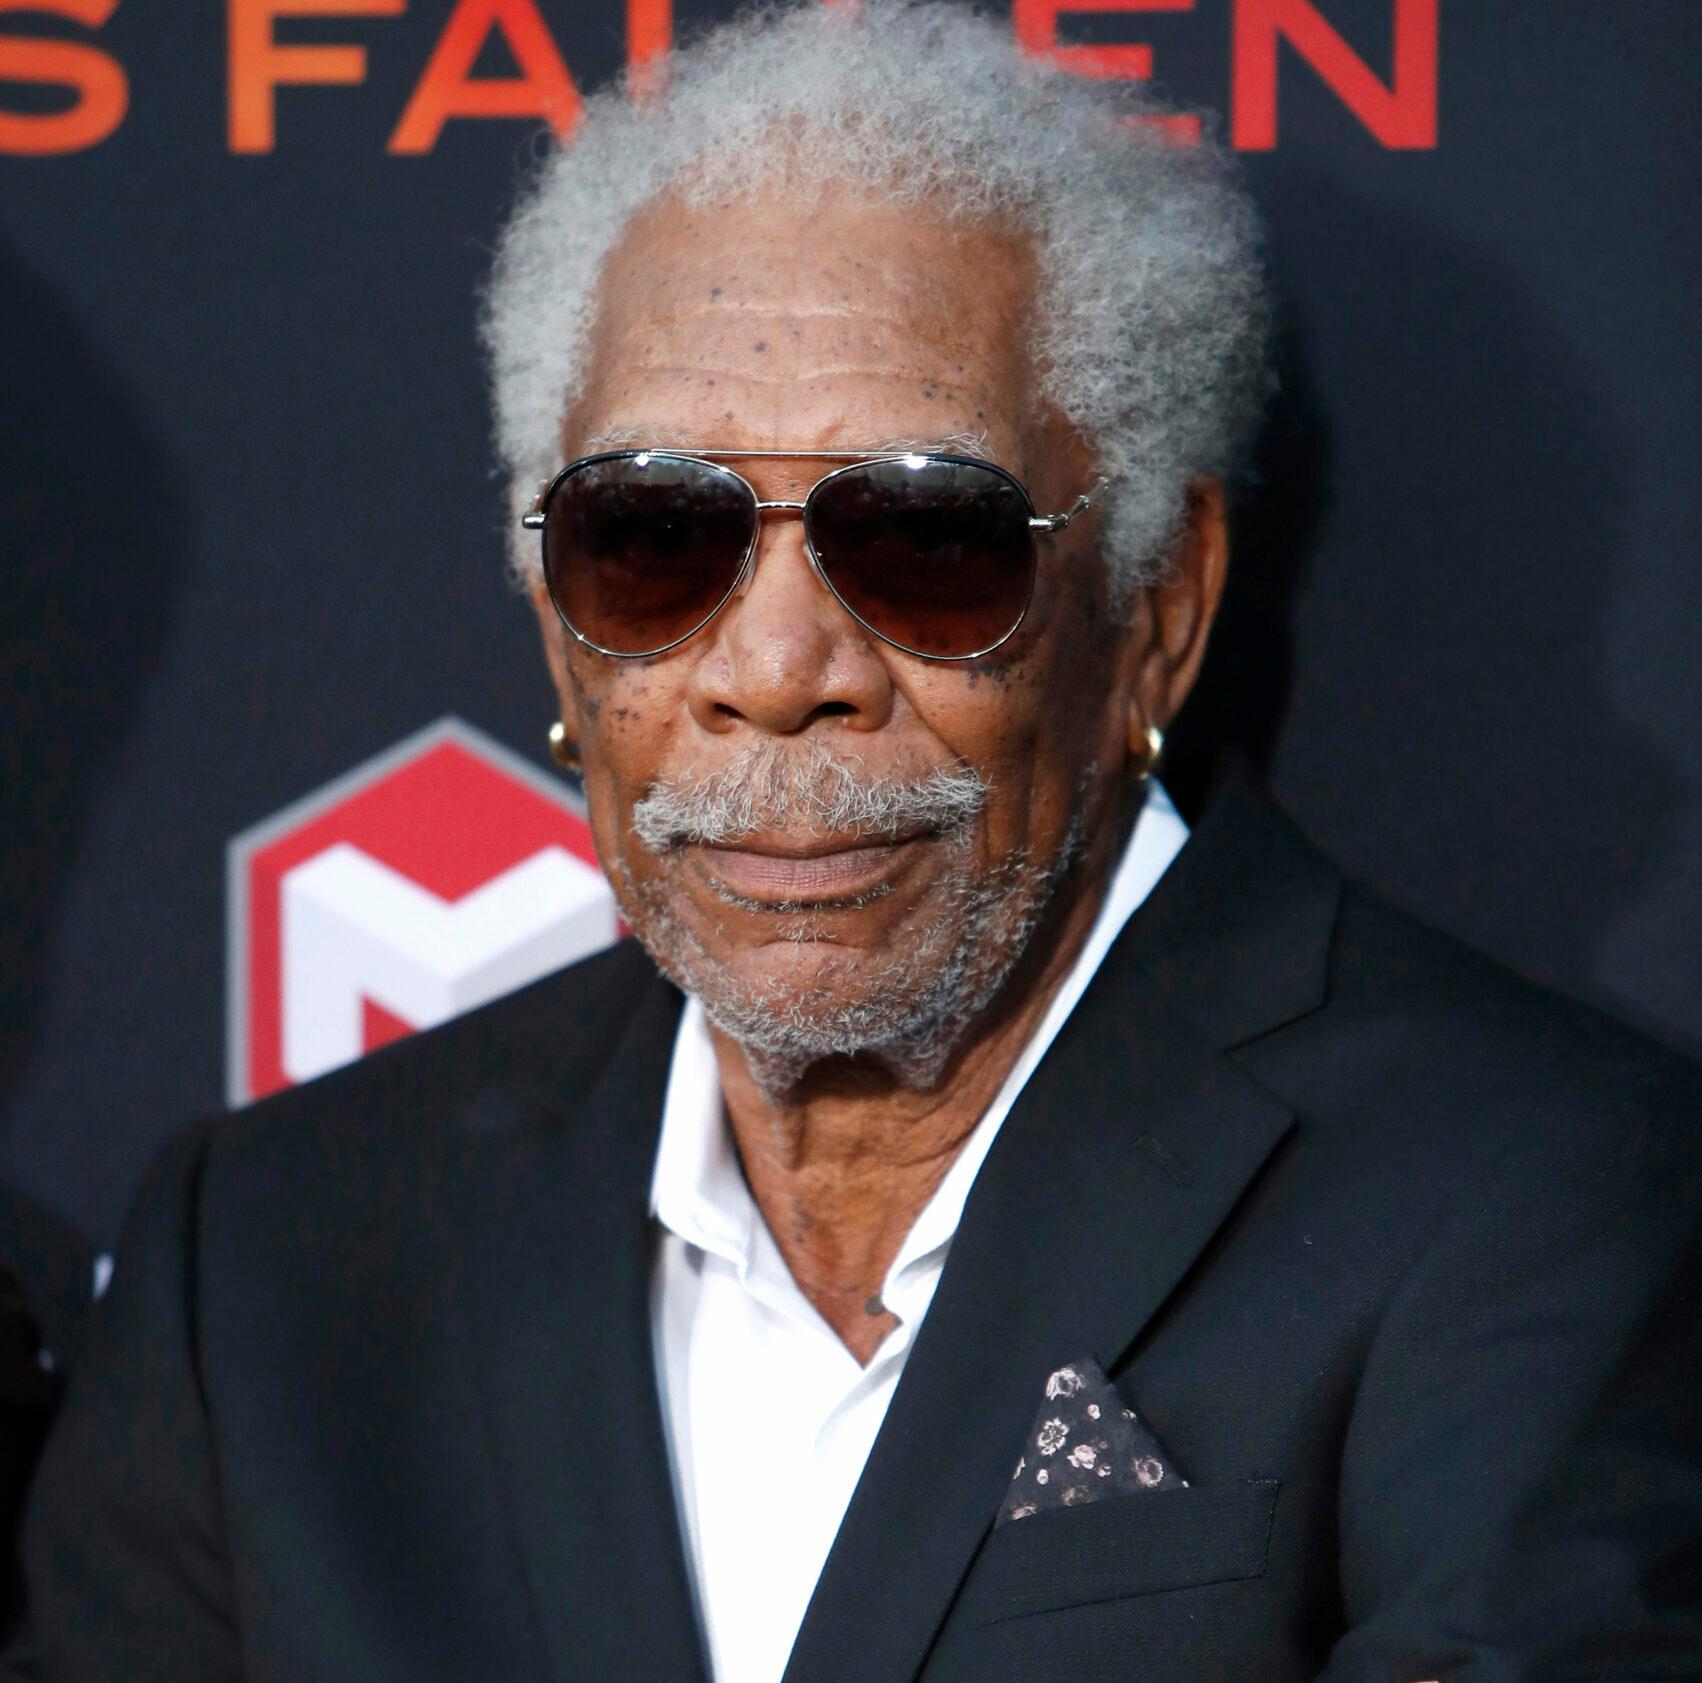 LOS ANGELES - AUG 21: Morgan Freeman at the "Angel Has Fallen" Premiere at the Village Theater on August 21, 2019 in Westwood, CA